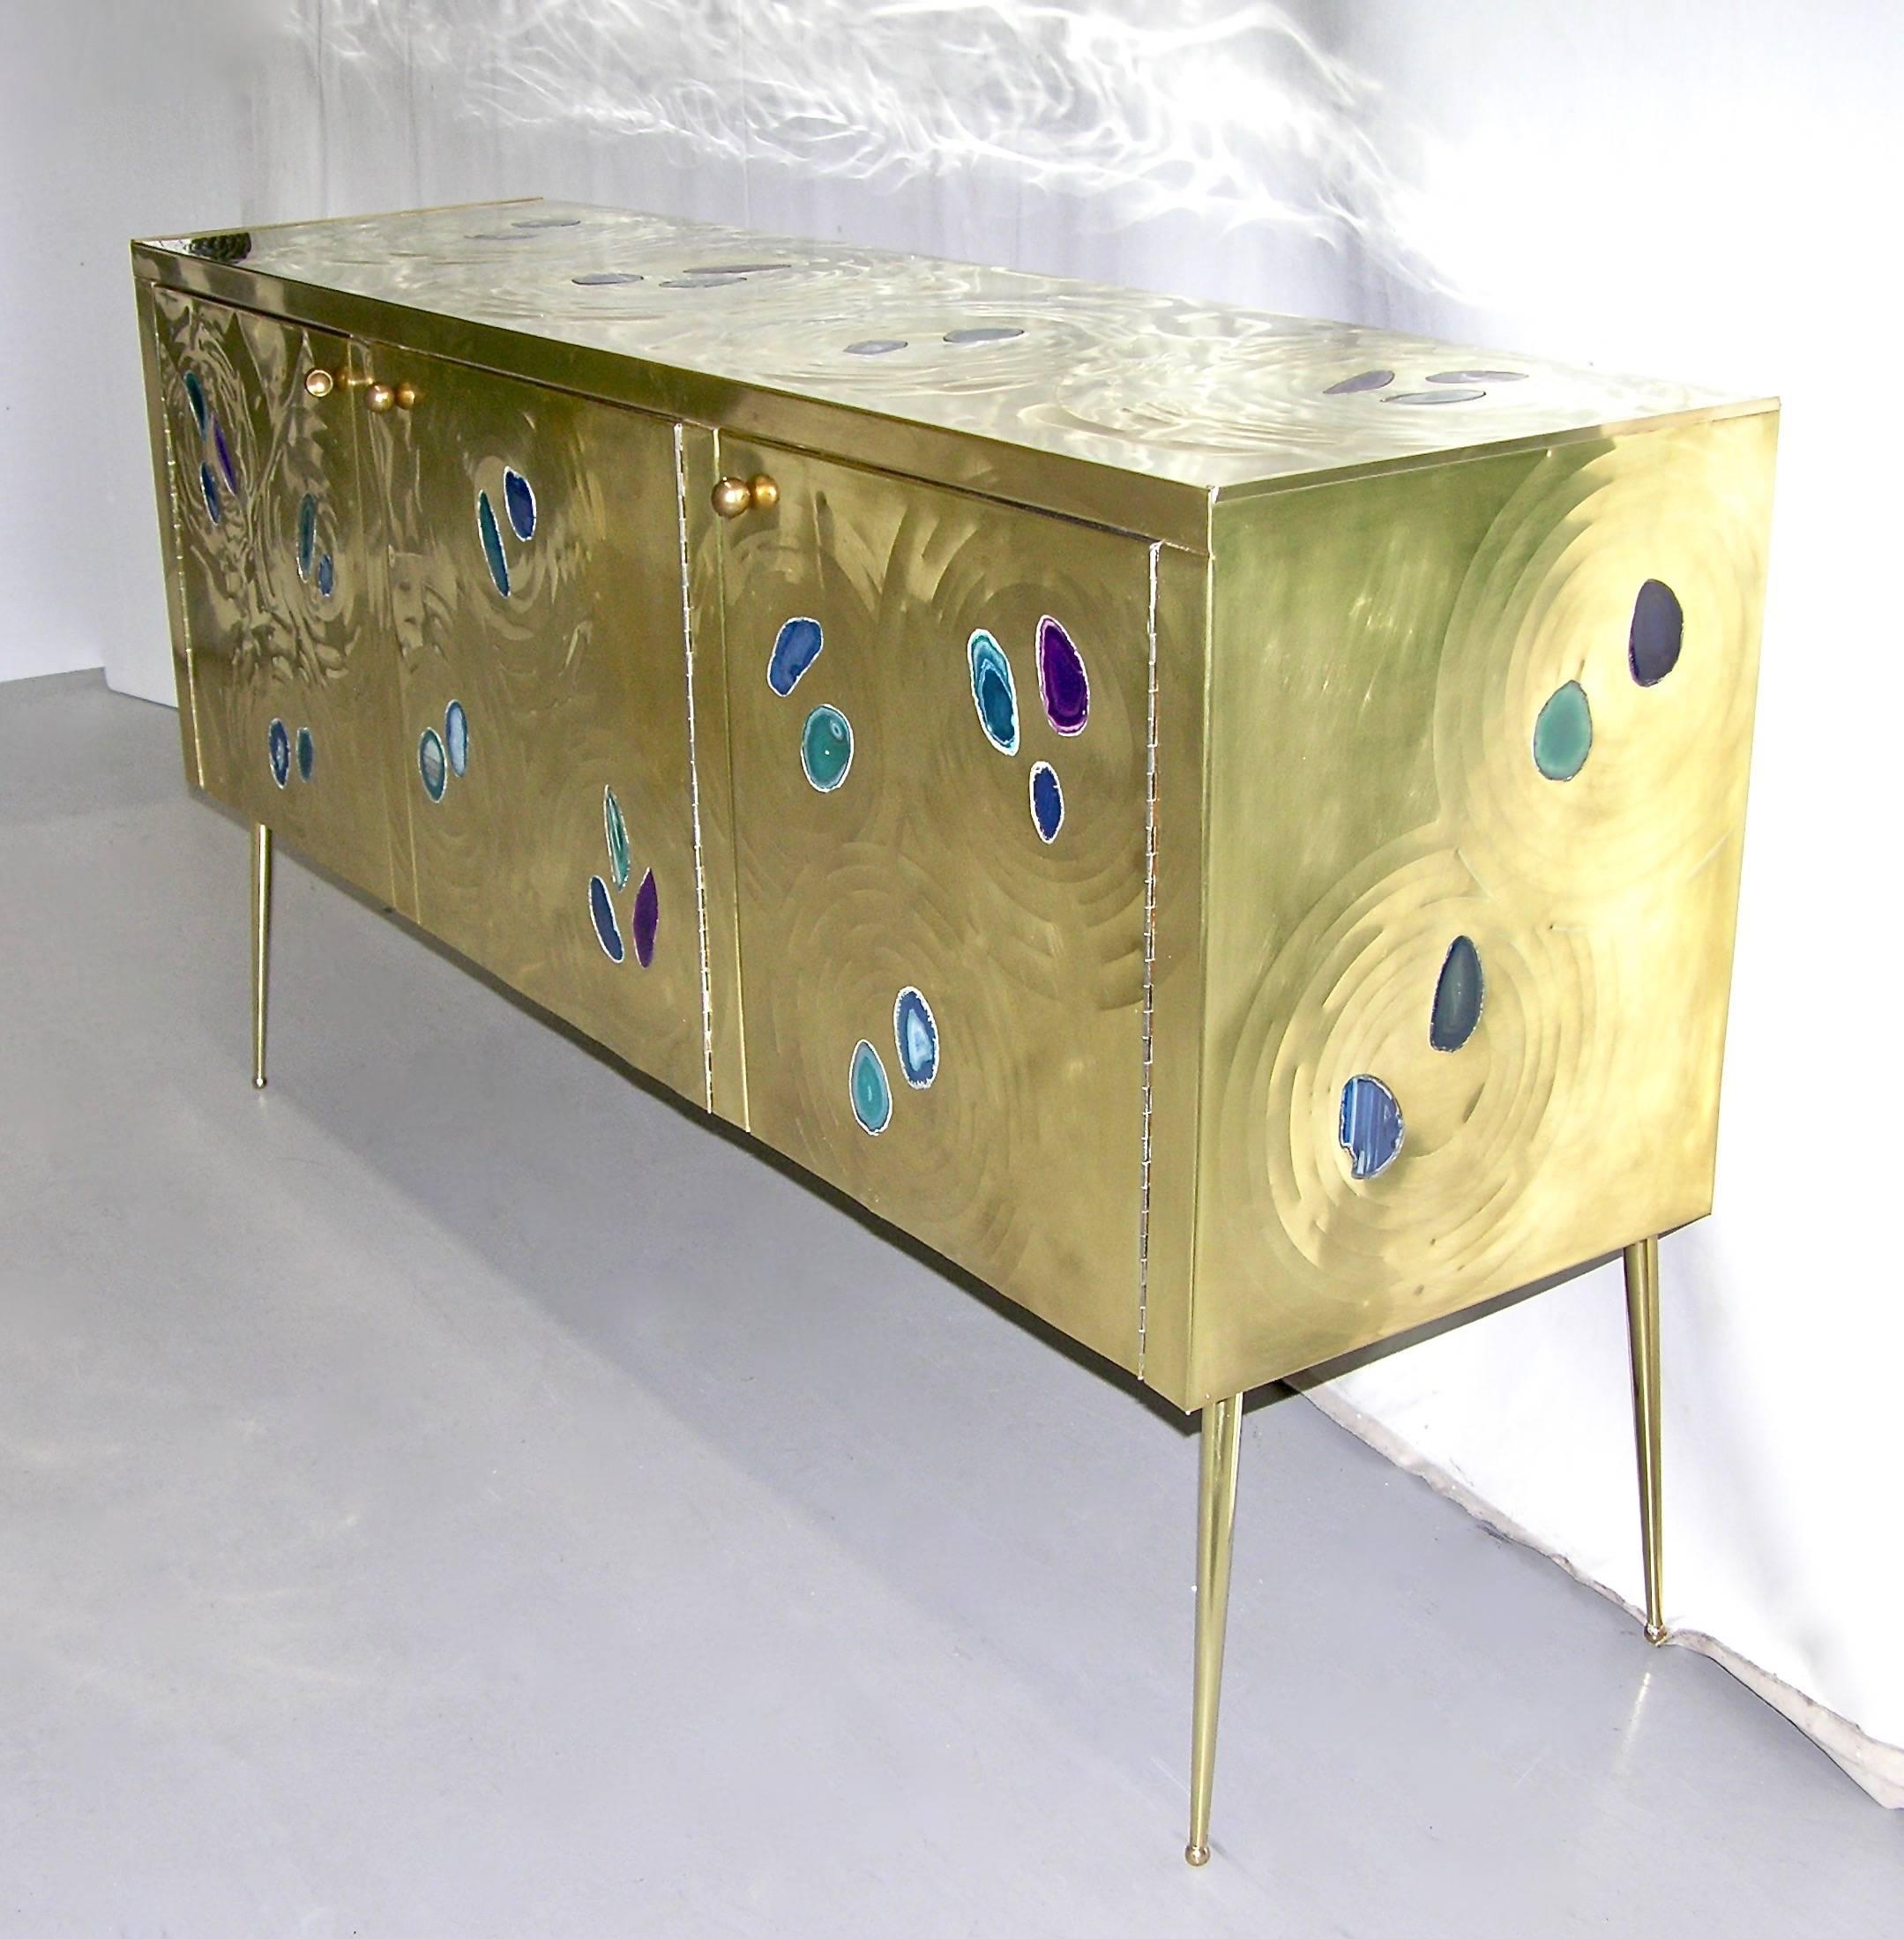 A fine design Italian credenza or sideboard with three doors, entirely handmade, wrapped in gold brass decorated with insets of cut agate in purple, blue and green. The stone is set like jewelry in the brass with a sophisticated rippled decor like